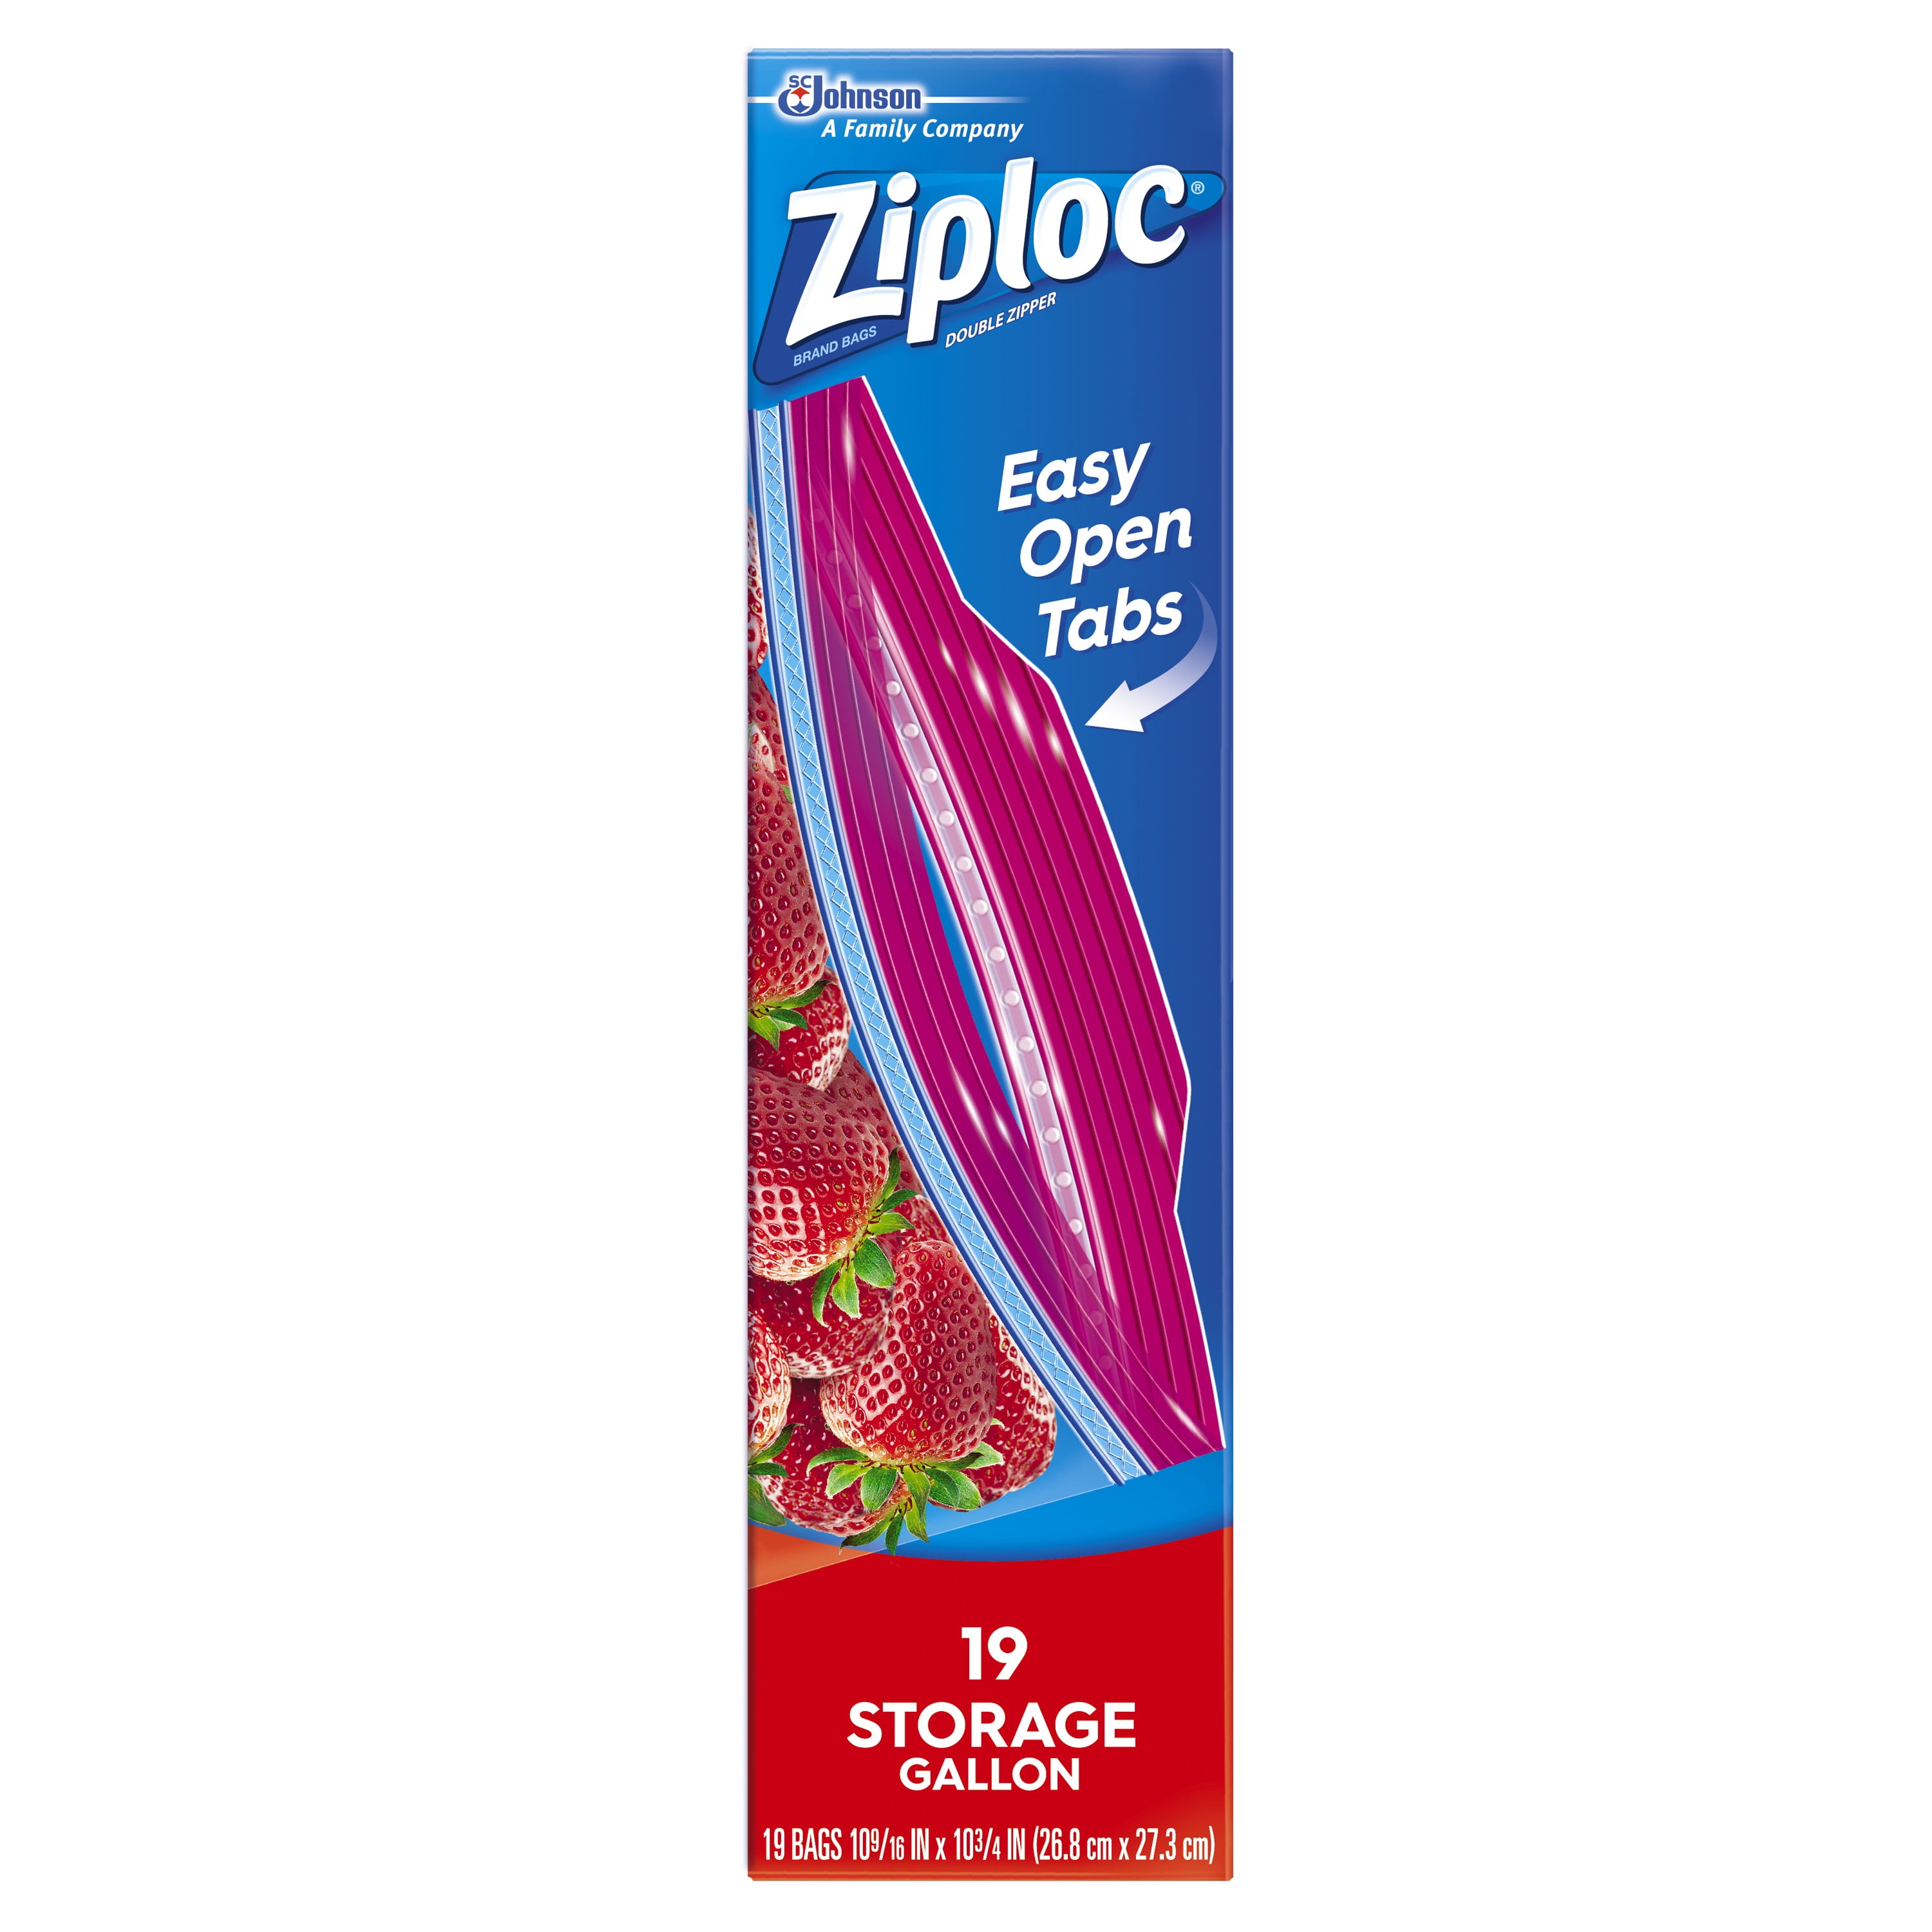 Ziploc Holiday Storage Bags Gallon 19 Count 19 CT Pack of 2 Star Cookie Design 